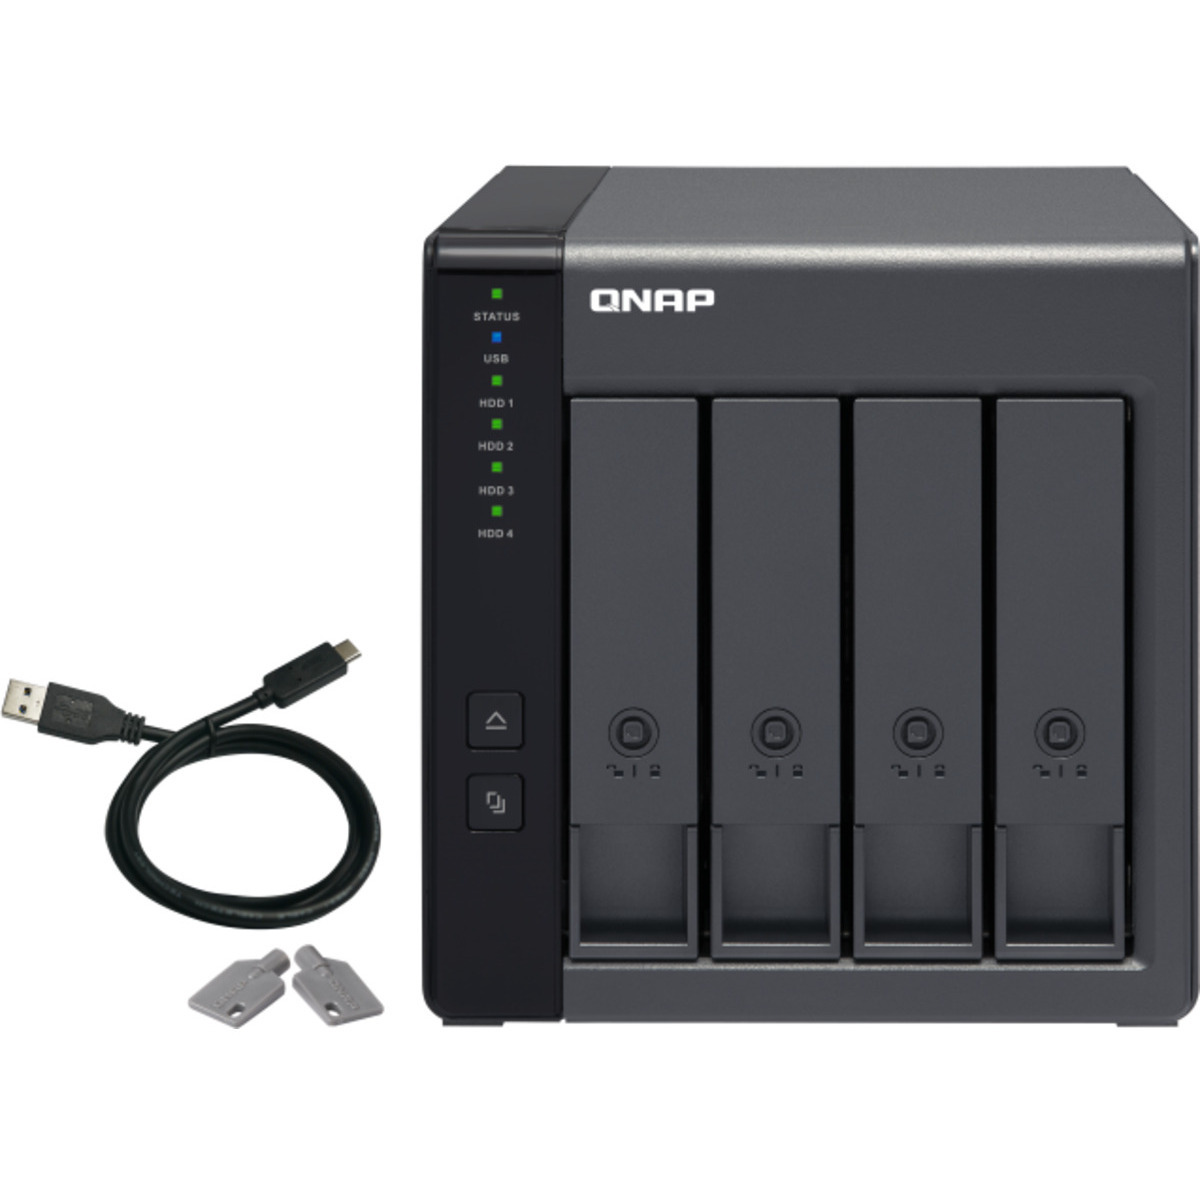 QNAP TR-004 External Expansion Drive 6tb 4-Bay Desktop Multimedia / Power User / Business Expansion Enclosure 3x2tb Western Digital Red Pro WD2002FFSX 3.5 7200rpm SATA 6Gb/s HDD NAS Class Drives Installed - Burn-In Tested TR-004 External Expansion Drive